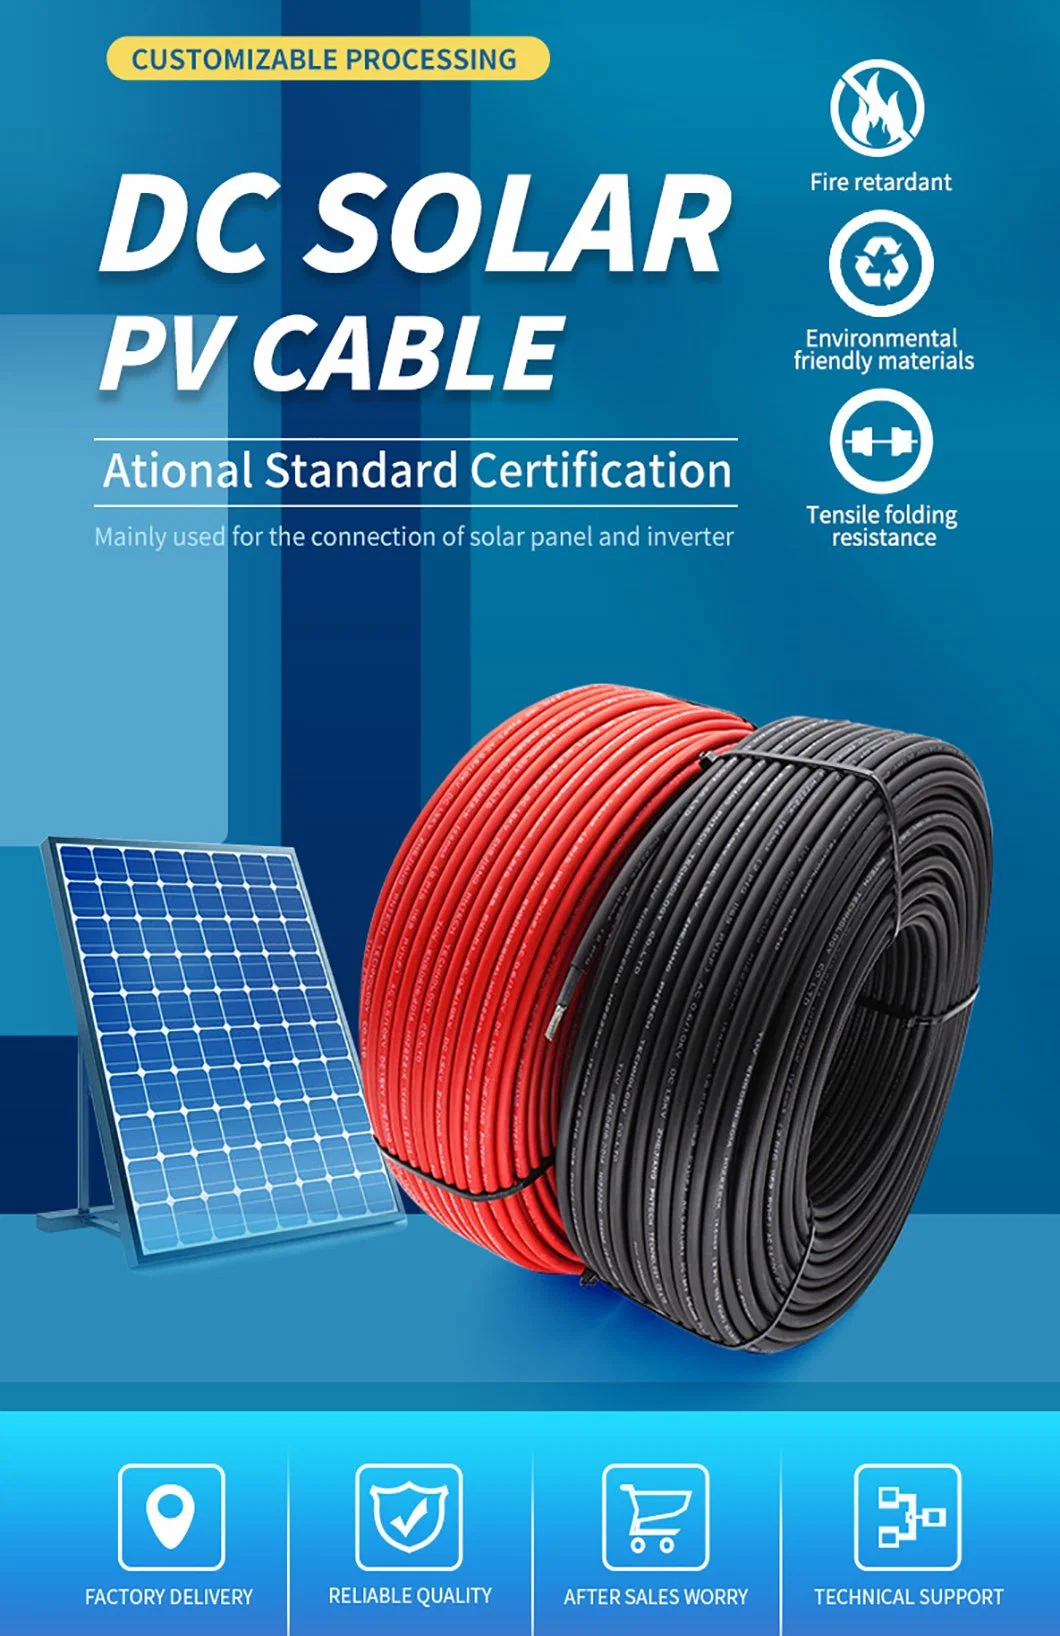 Xlpo Xlpo Double Insulation Solar Cable 2.5mm2 Solar Energy Cable DC Solar PV Cable 4mm PV1-F 1X2.5mm2 with Quality Assurance